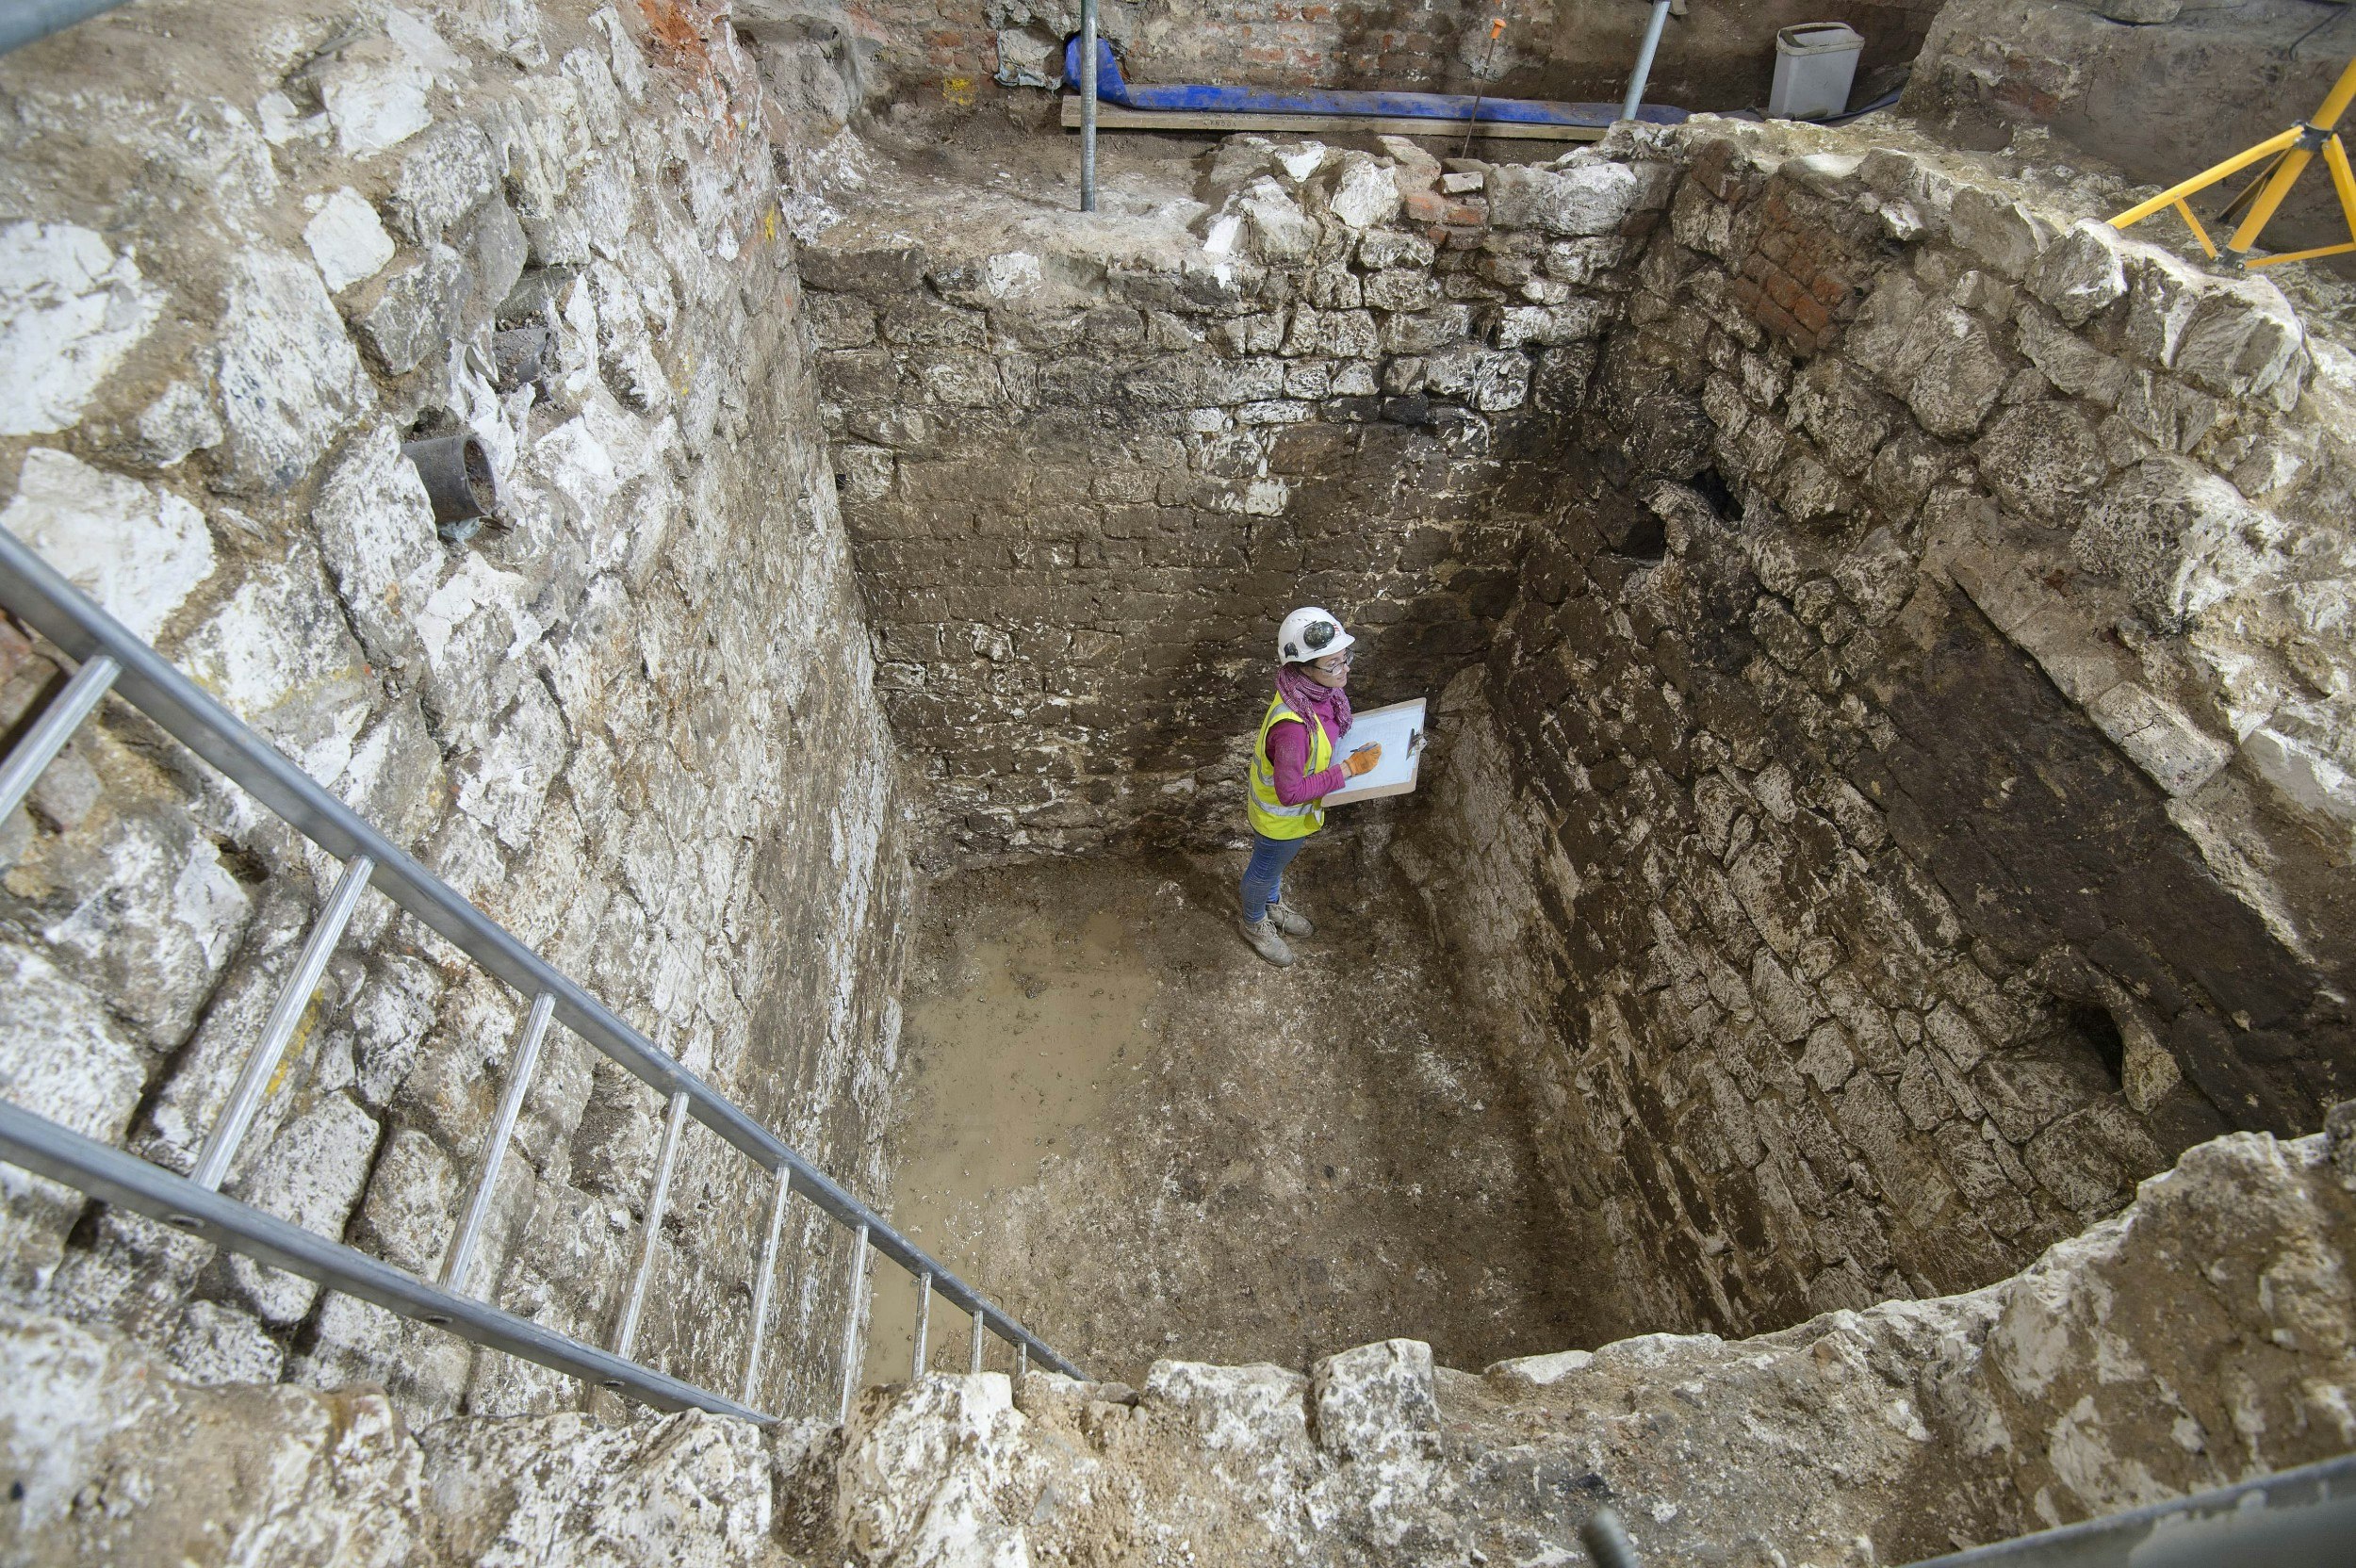 A MOLA archaeologist recording a 15th century cesspit uncovered in the basement of the Courtauld